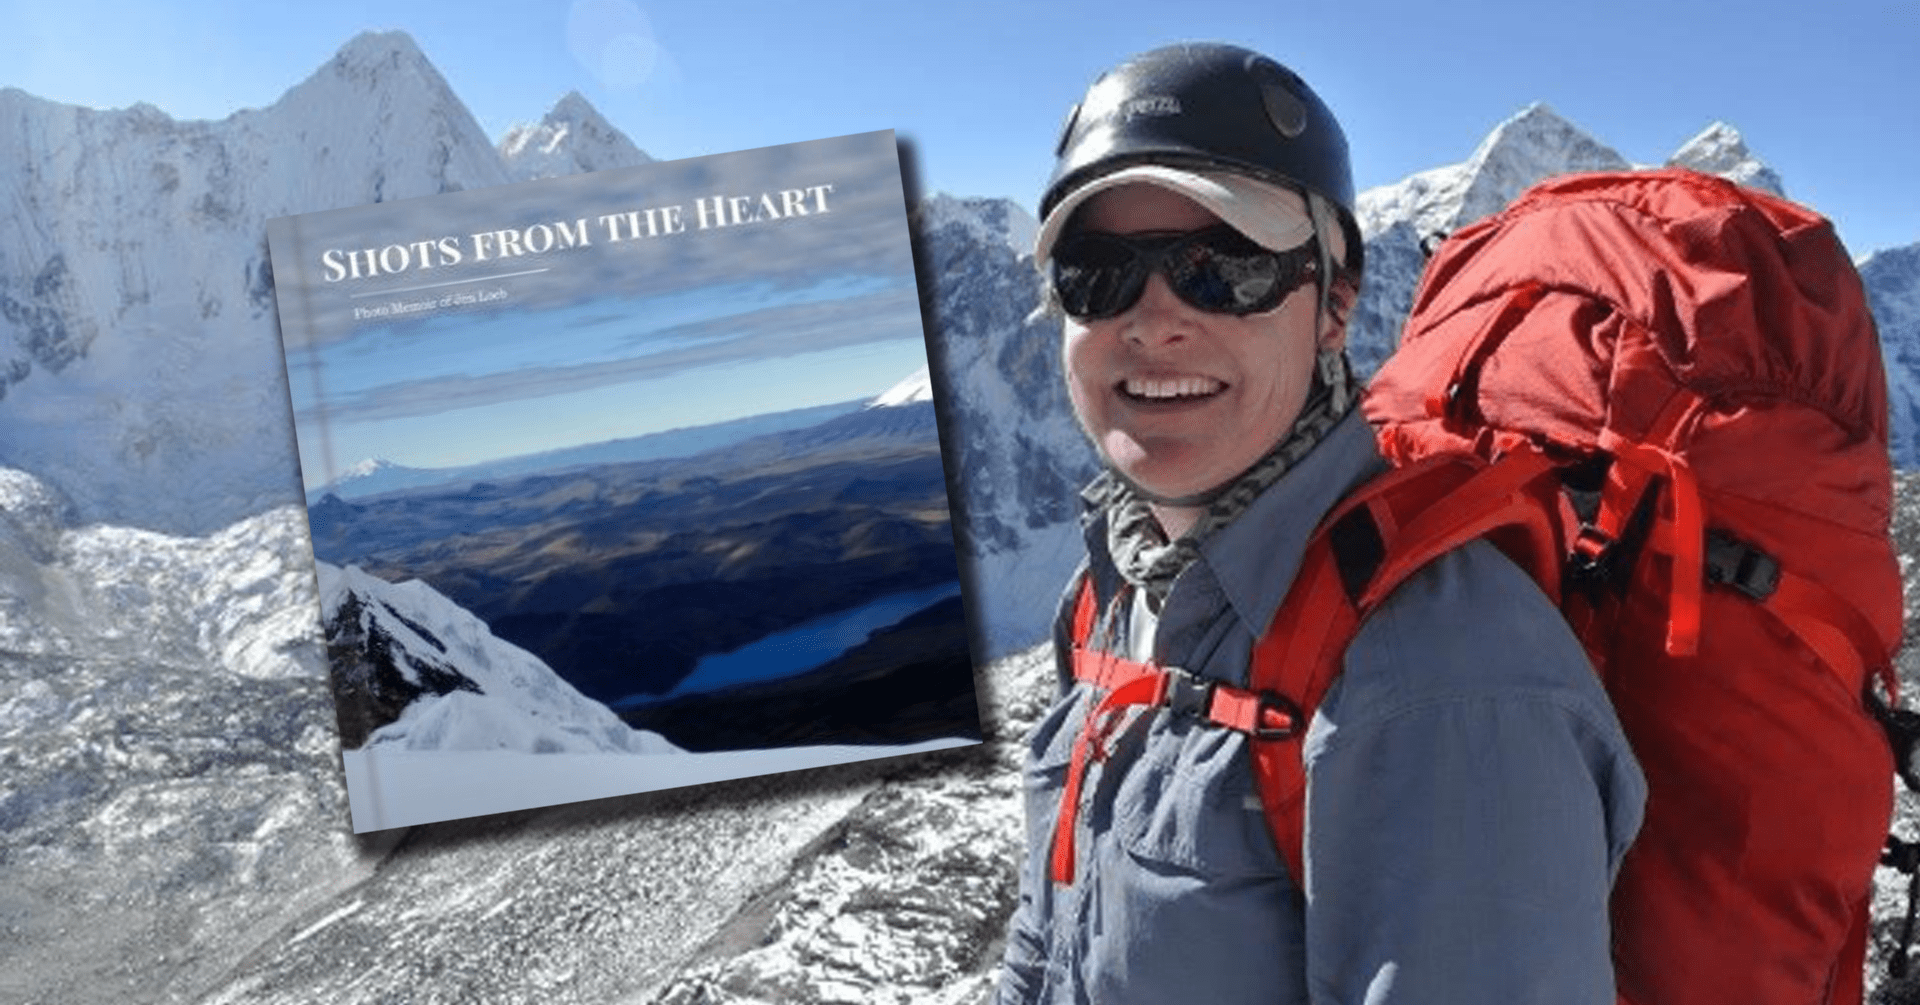 Jen Loeb mountain climbing photo, and picture of cover of book "Shots from the Heart" by Jen Loeb.